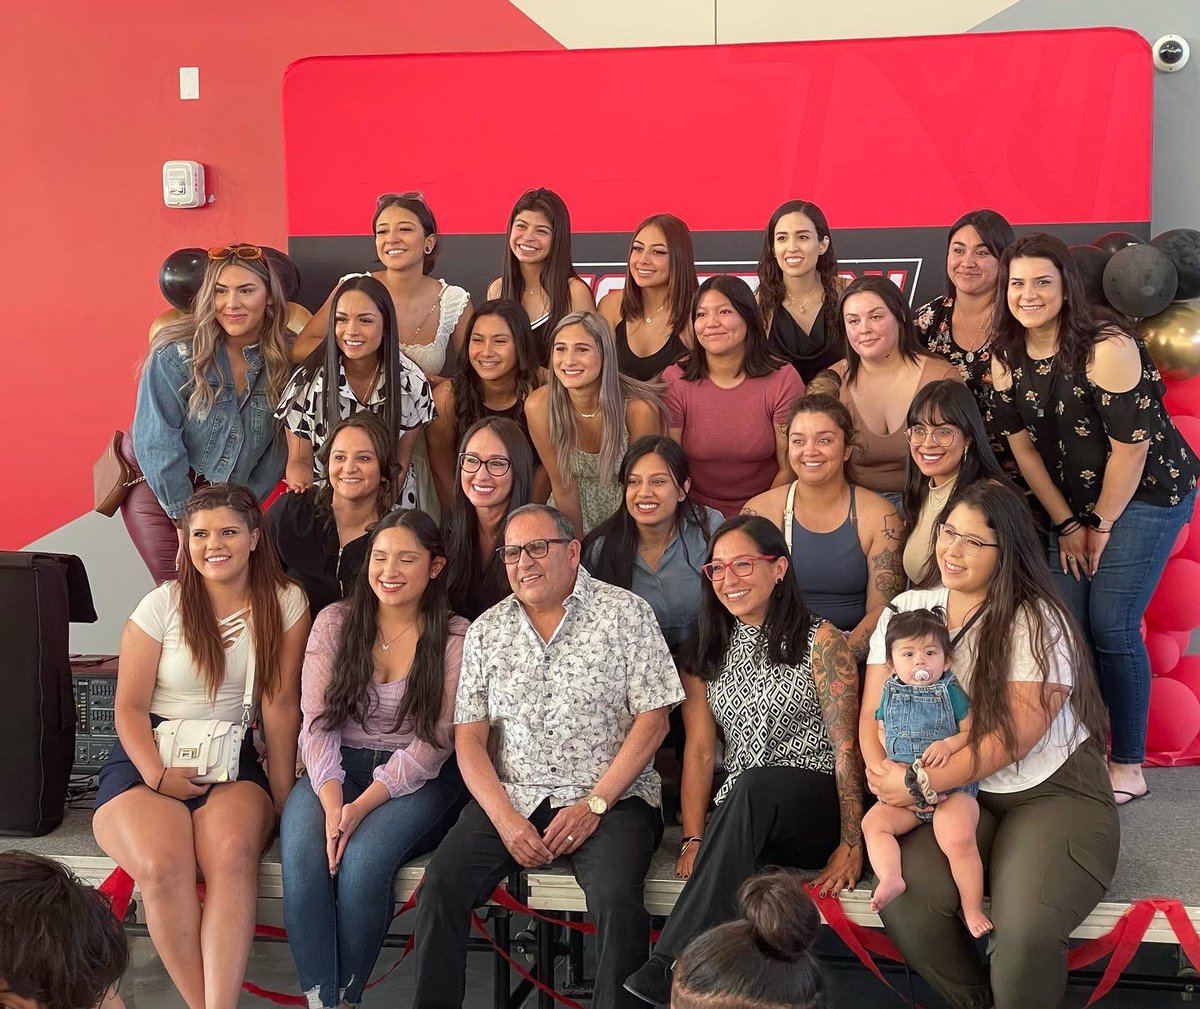 Last nights Girls Soccer and Cross Country banquet was an emotional success, all our soccer players and runners were recognized in their achievements this years!

Thank you Coach Trejo for your continuous hard word and dedication to our campus!

#vivalajeff #iamepisd